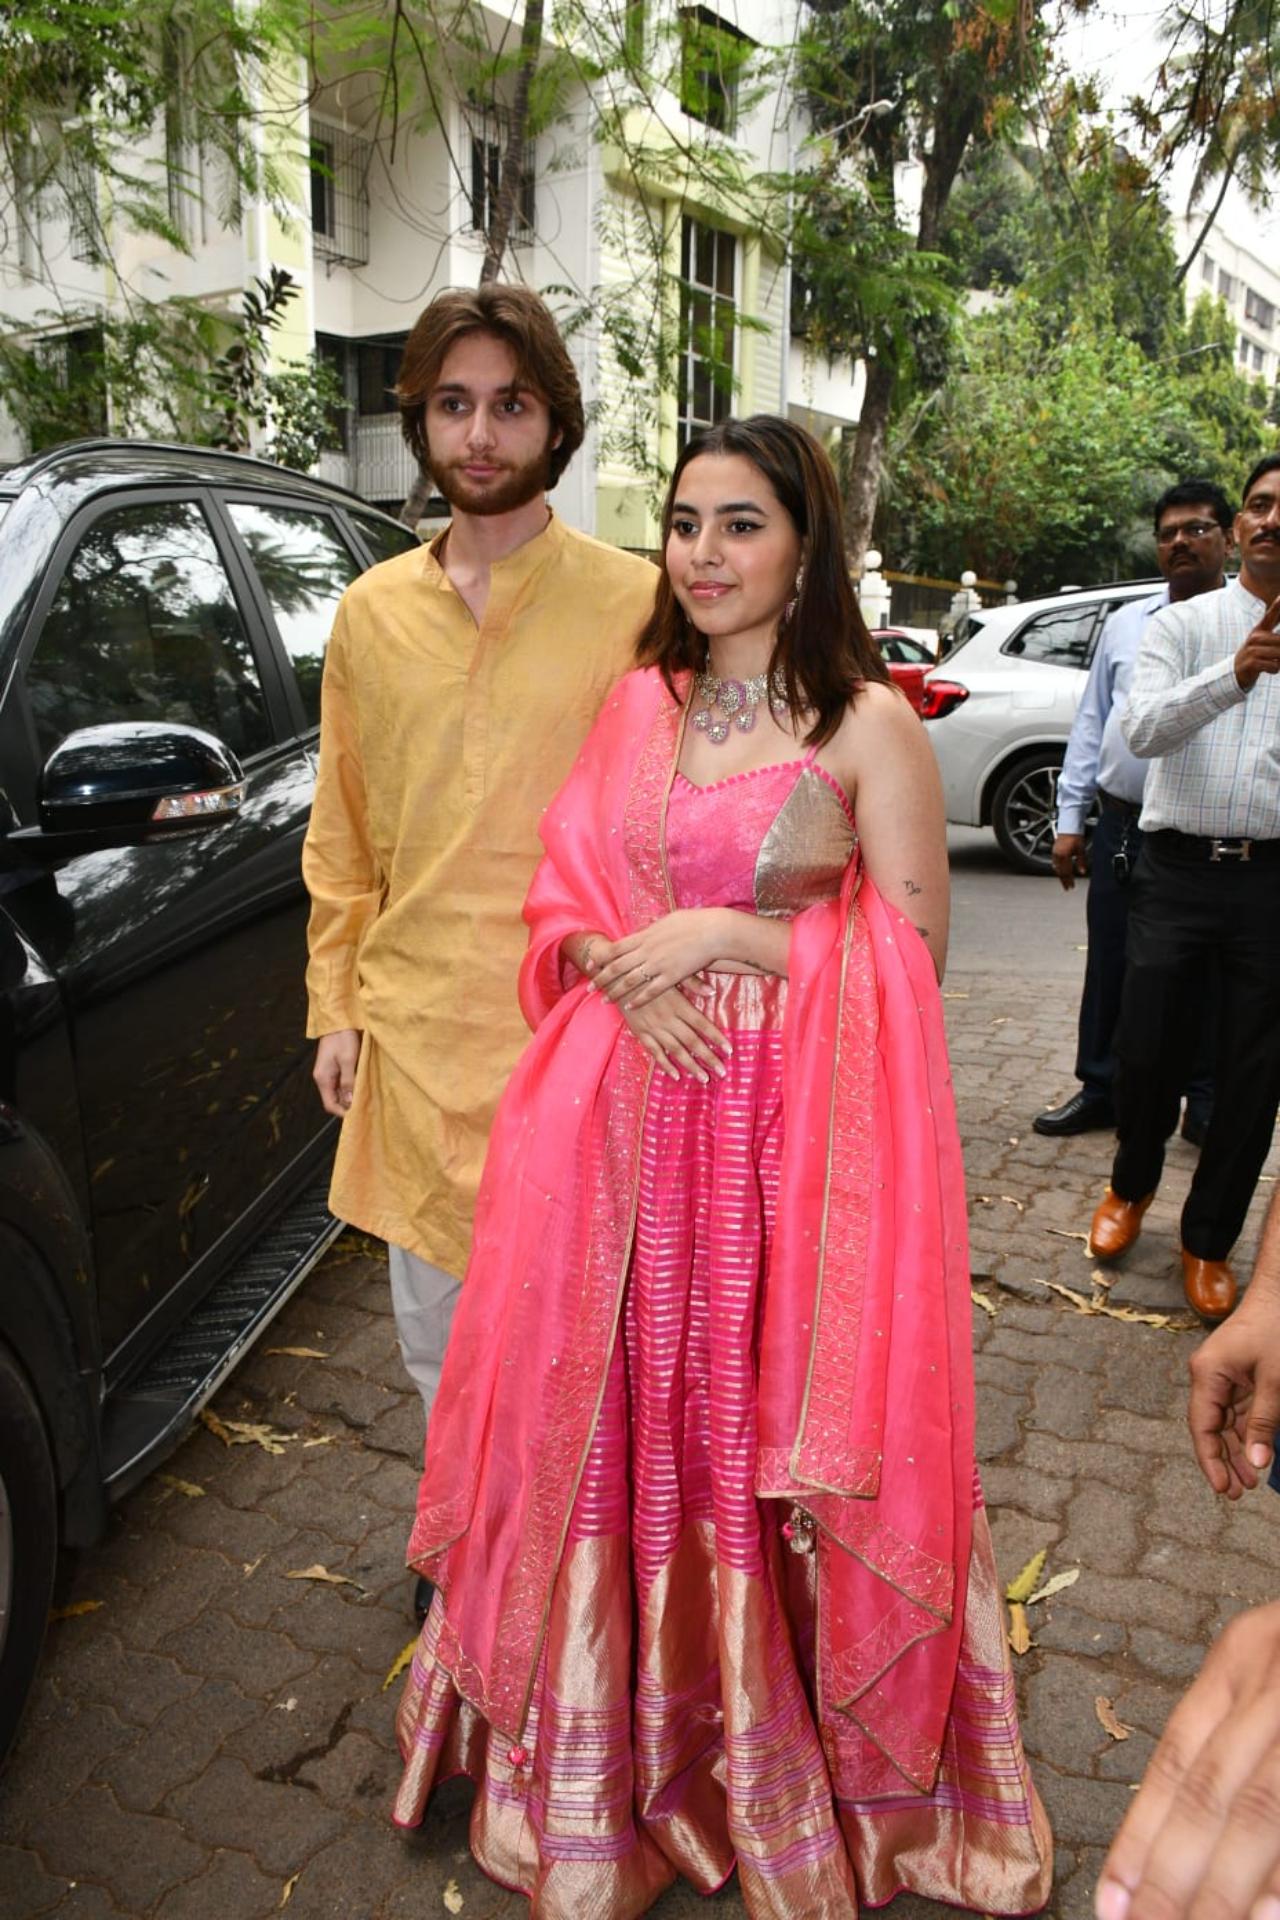 Filmmaker Anurag Kashyap's daughter Aaliyah was also at the pre-wedding festivities. A close friend of Alanna, Aaliyah was accompanied by her boyfriend Shane Gregoire